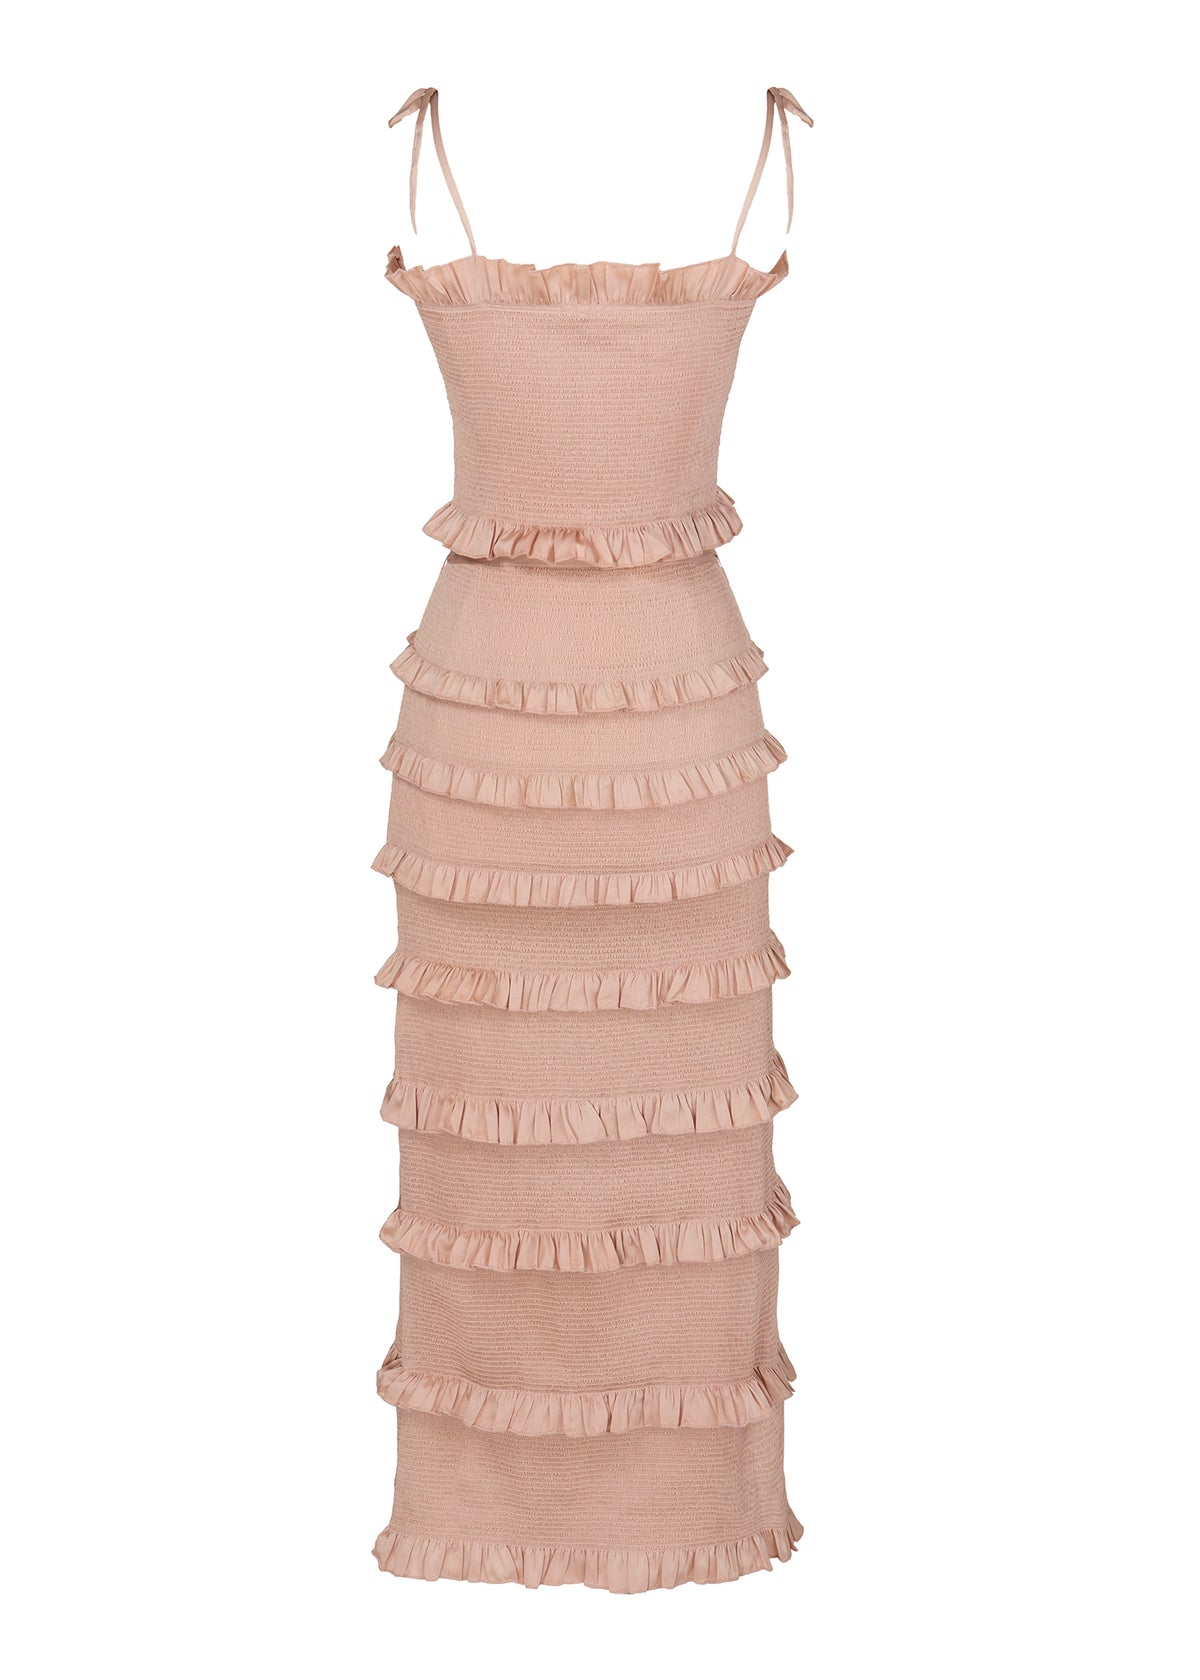 The Lily Dress in Rose Dust